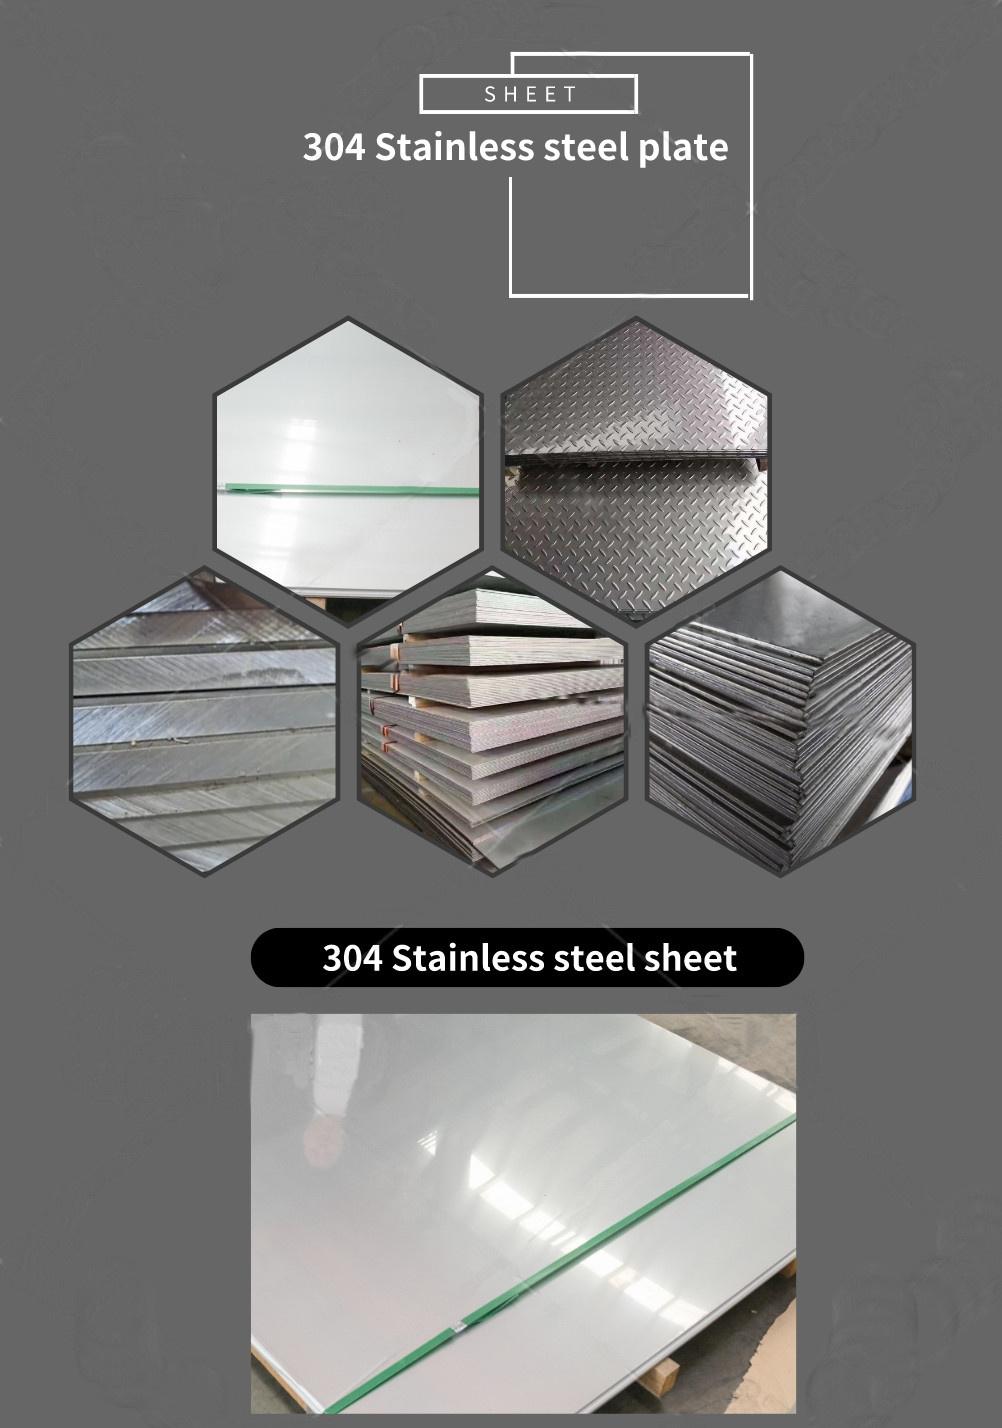 ASTM/GB/JIS 201 321 347 329 405 Hot Rolled Stainless Steel Plate for Boat Board